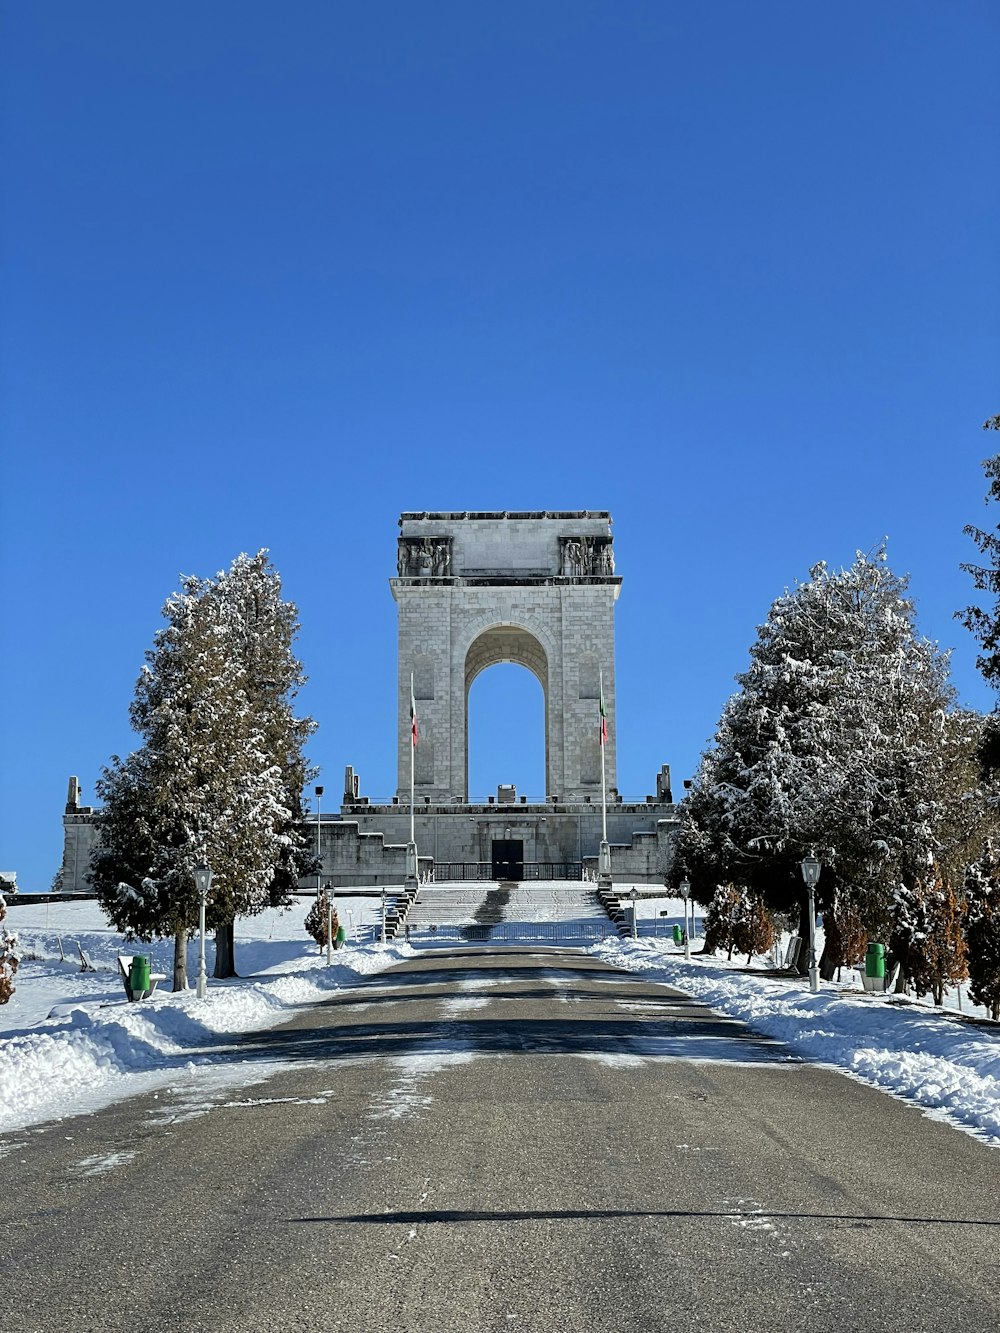 a large monument in the middle of a snowy park